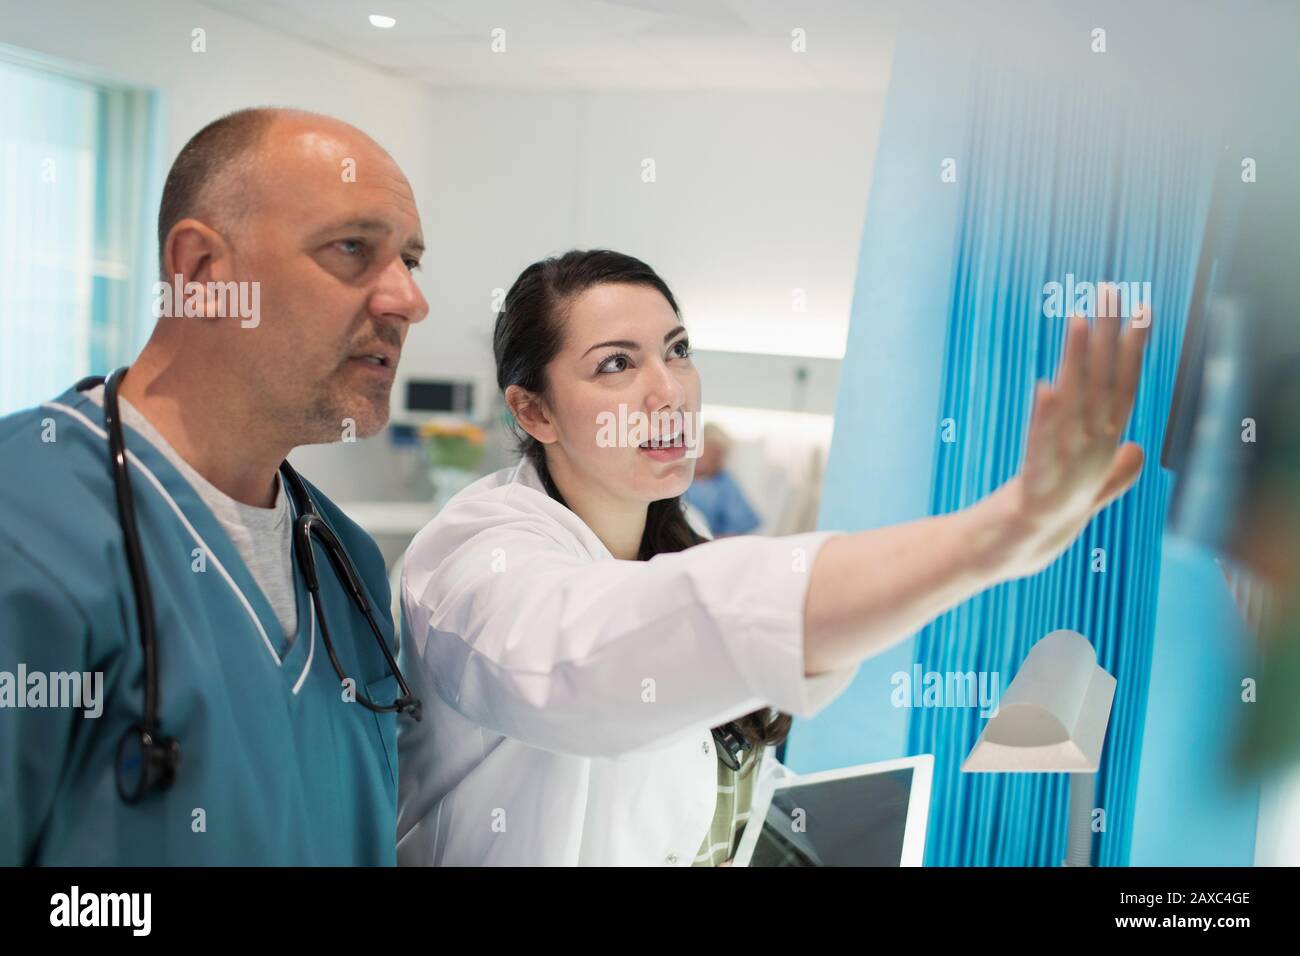 Doctors discussing x-rays in hospital room Stock Photo